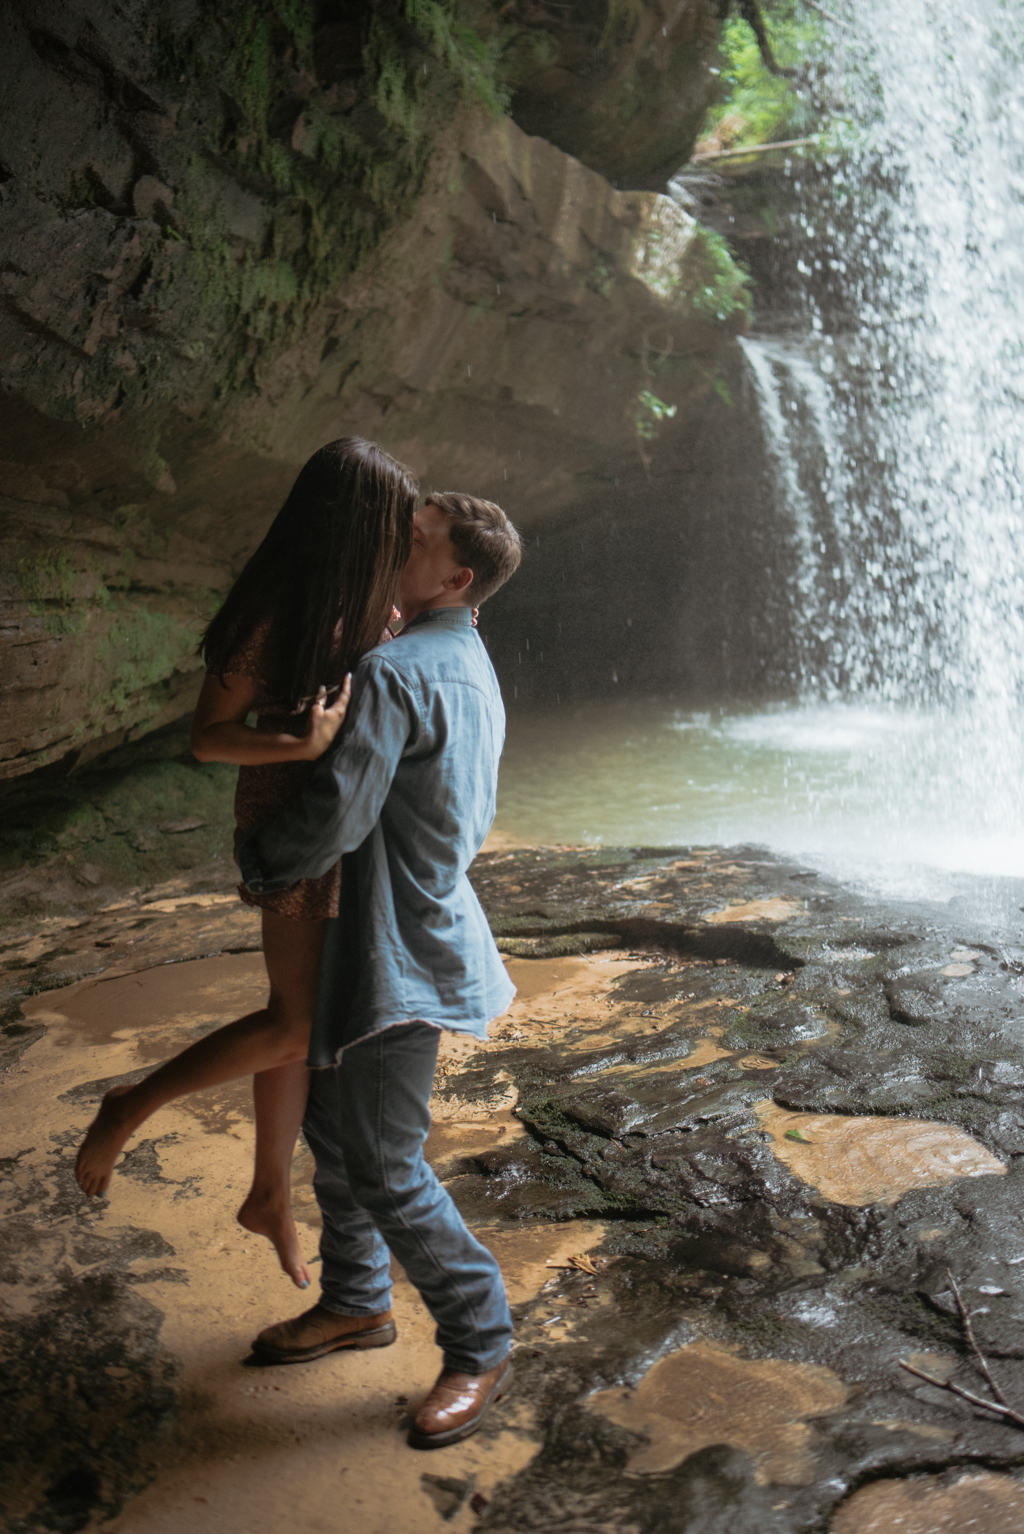 Man holding up woman underneath waterfall